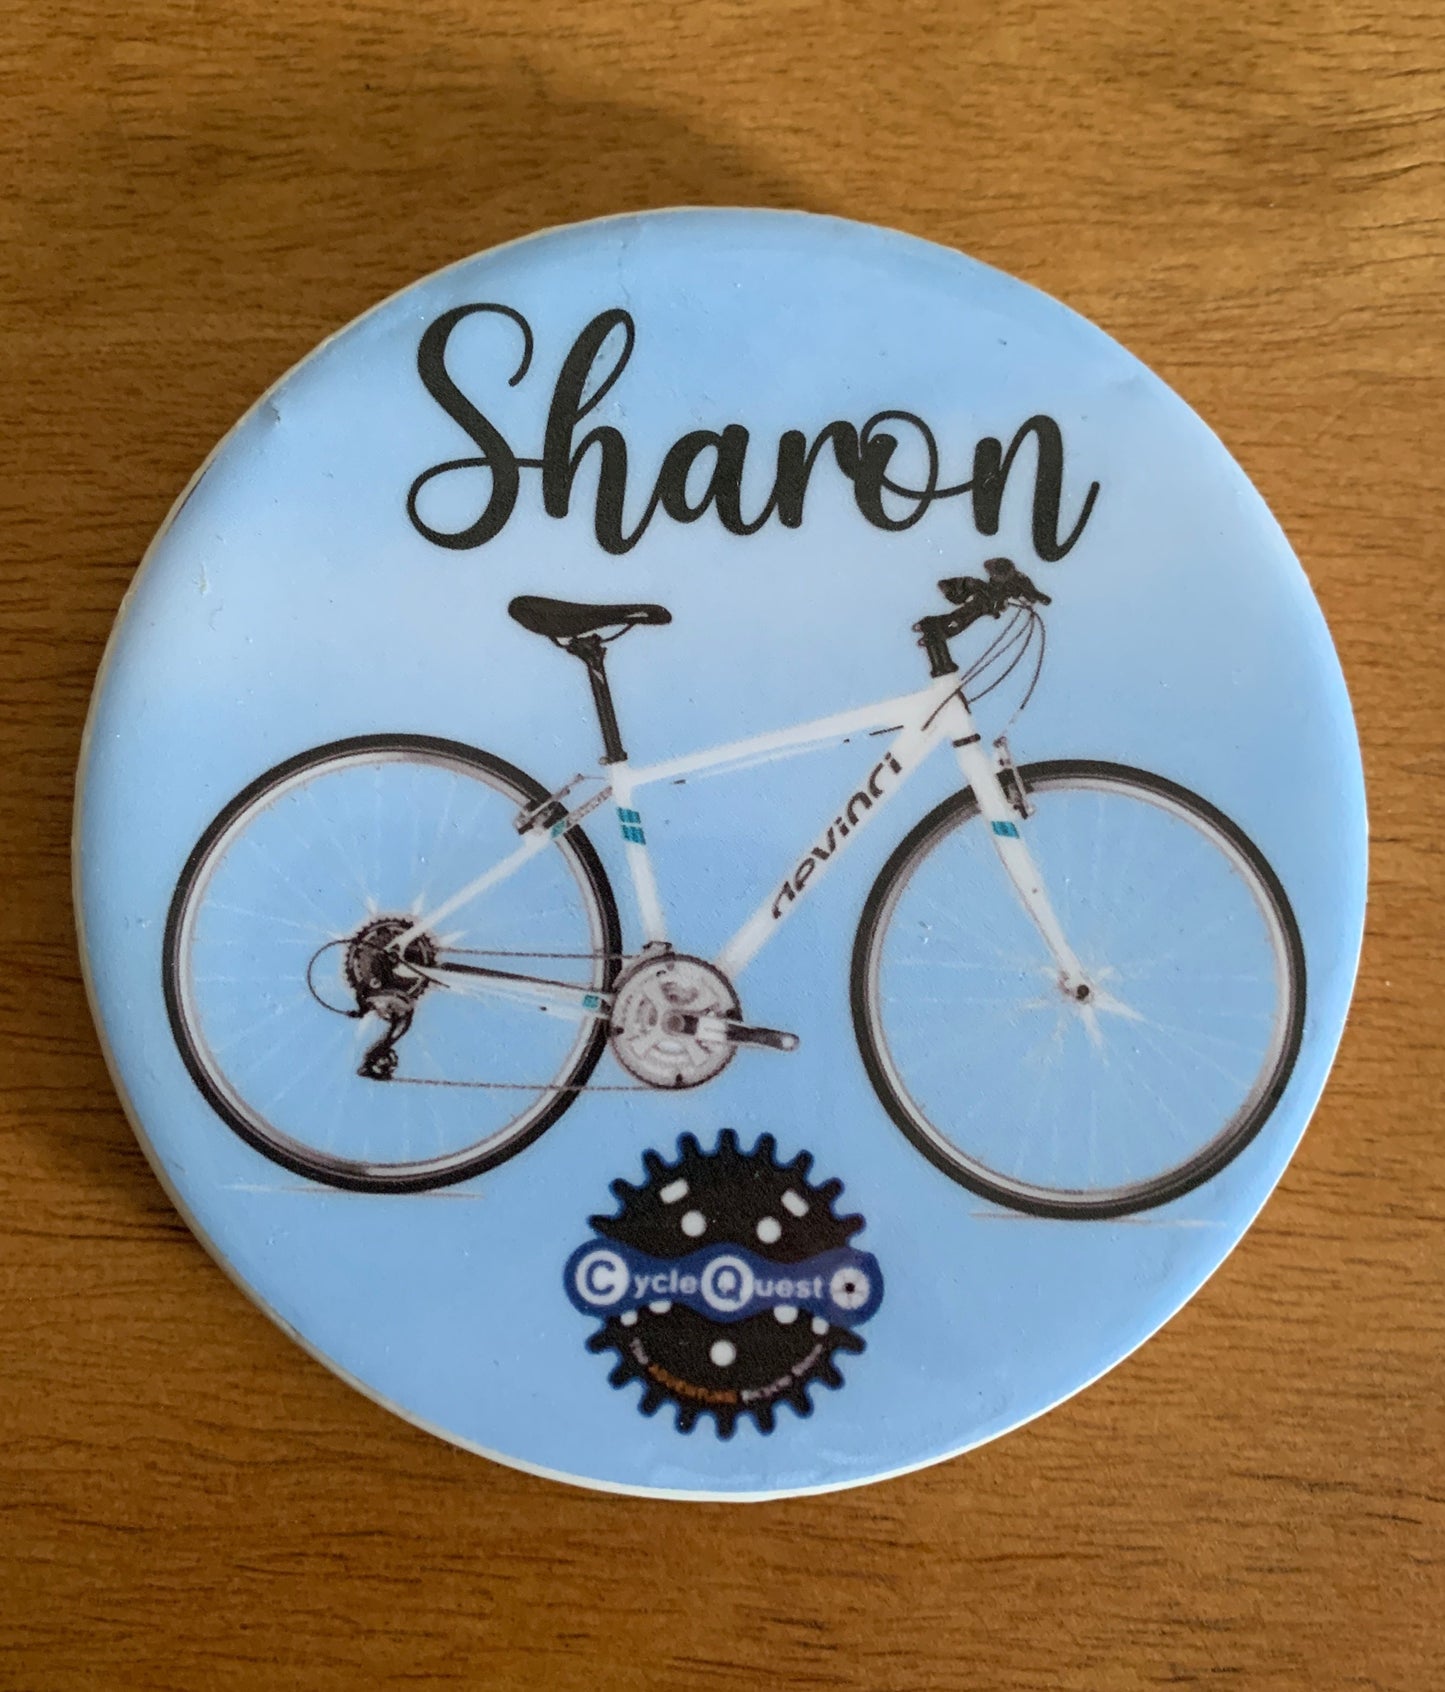 This is Sharon's exact bike with her store logo below.  